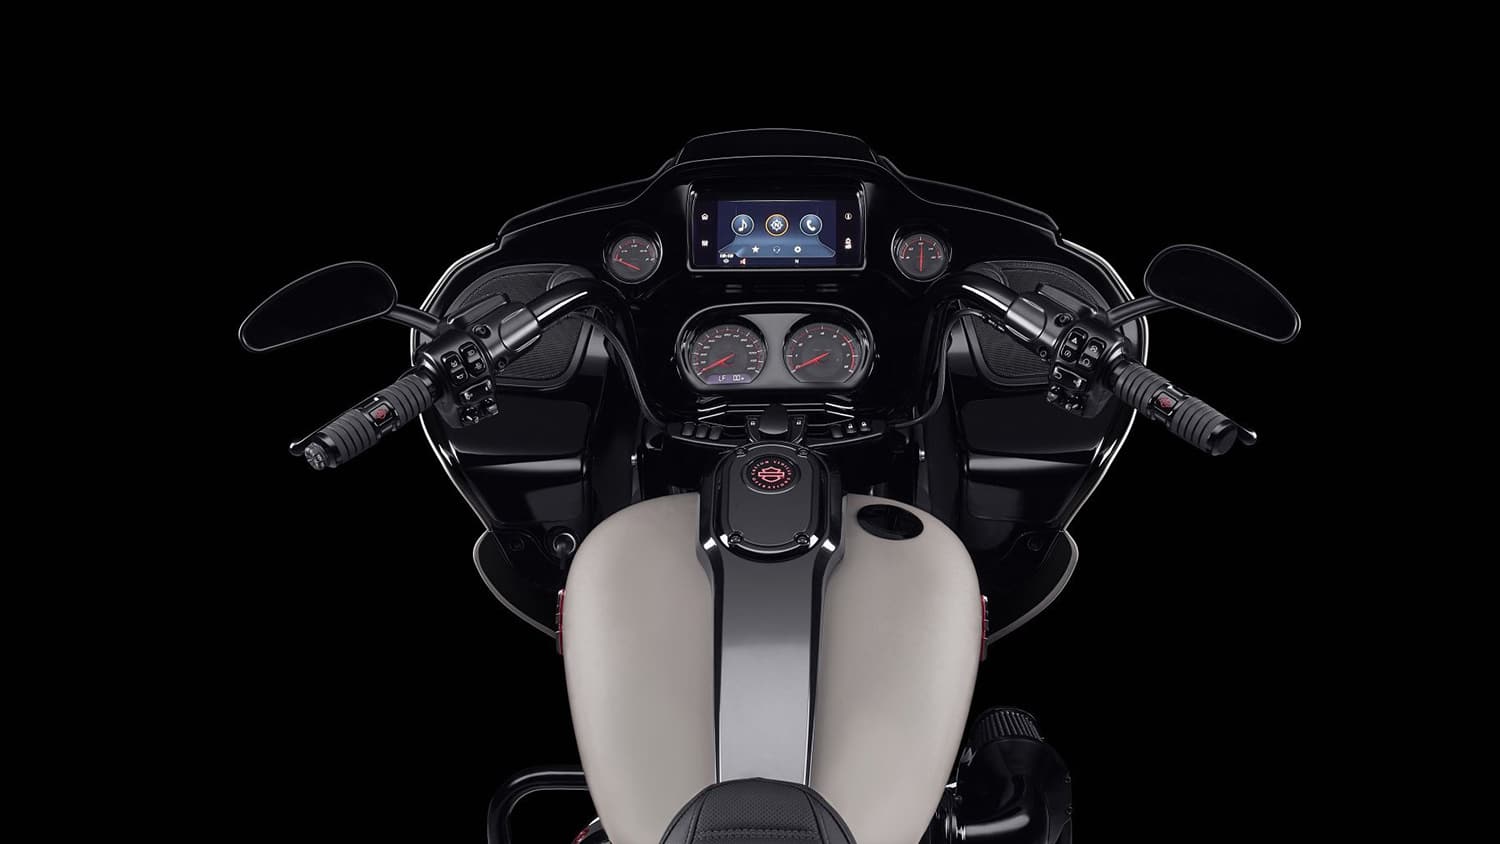 Harley-Davidson to add Android Auto support to their motorcycles.